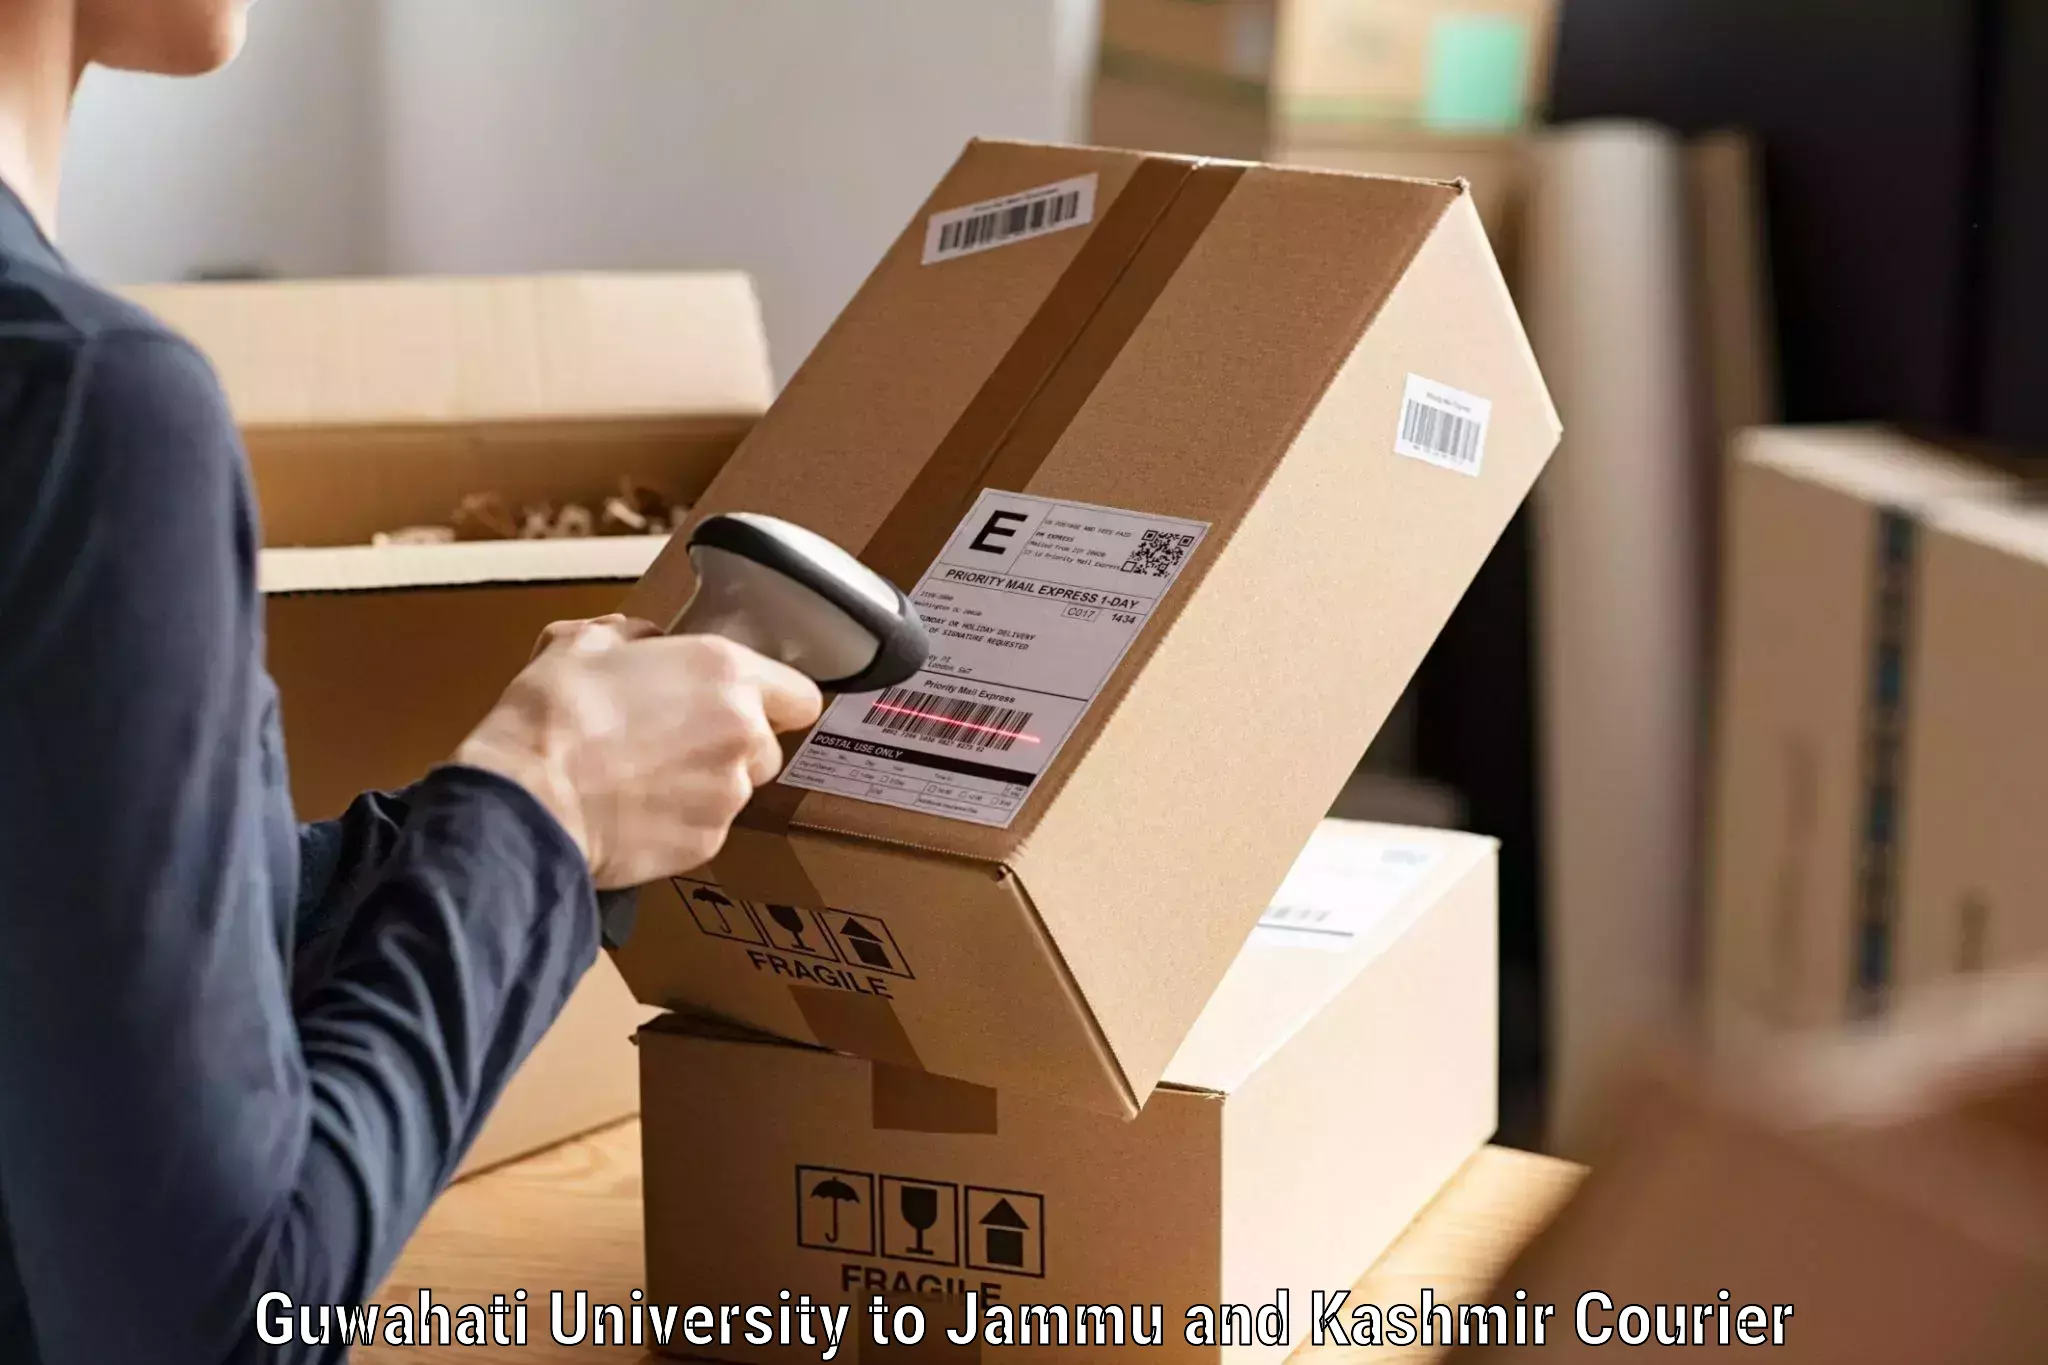 Cost-effective courier solutions Guwahati University to Leh